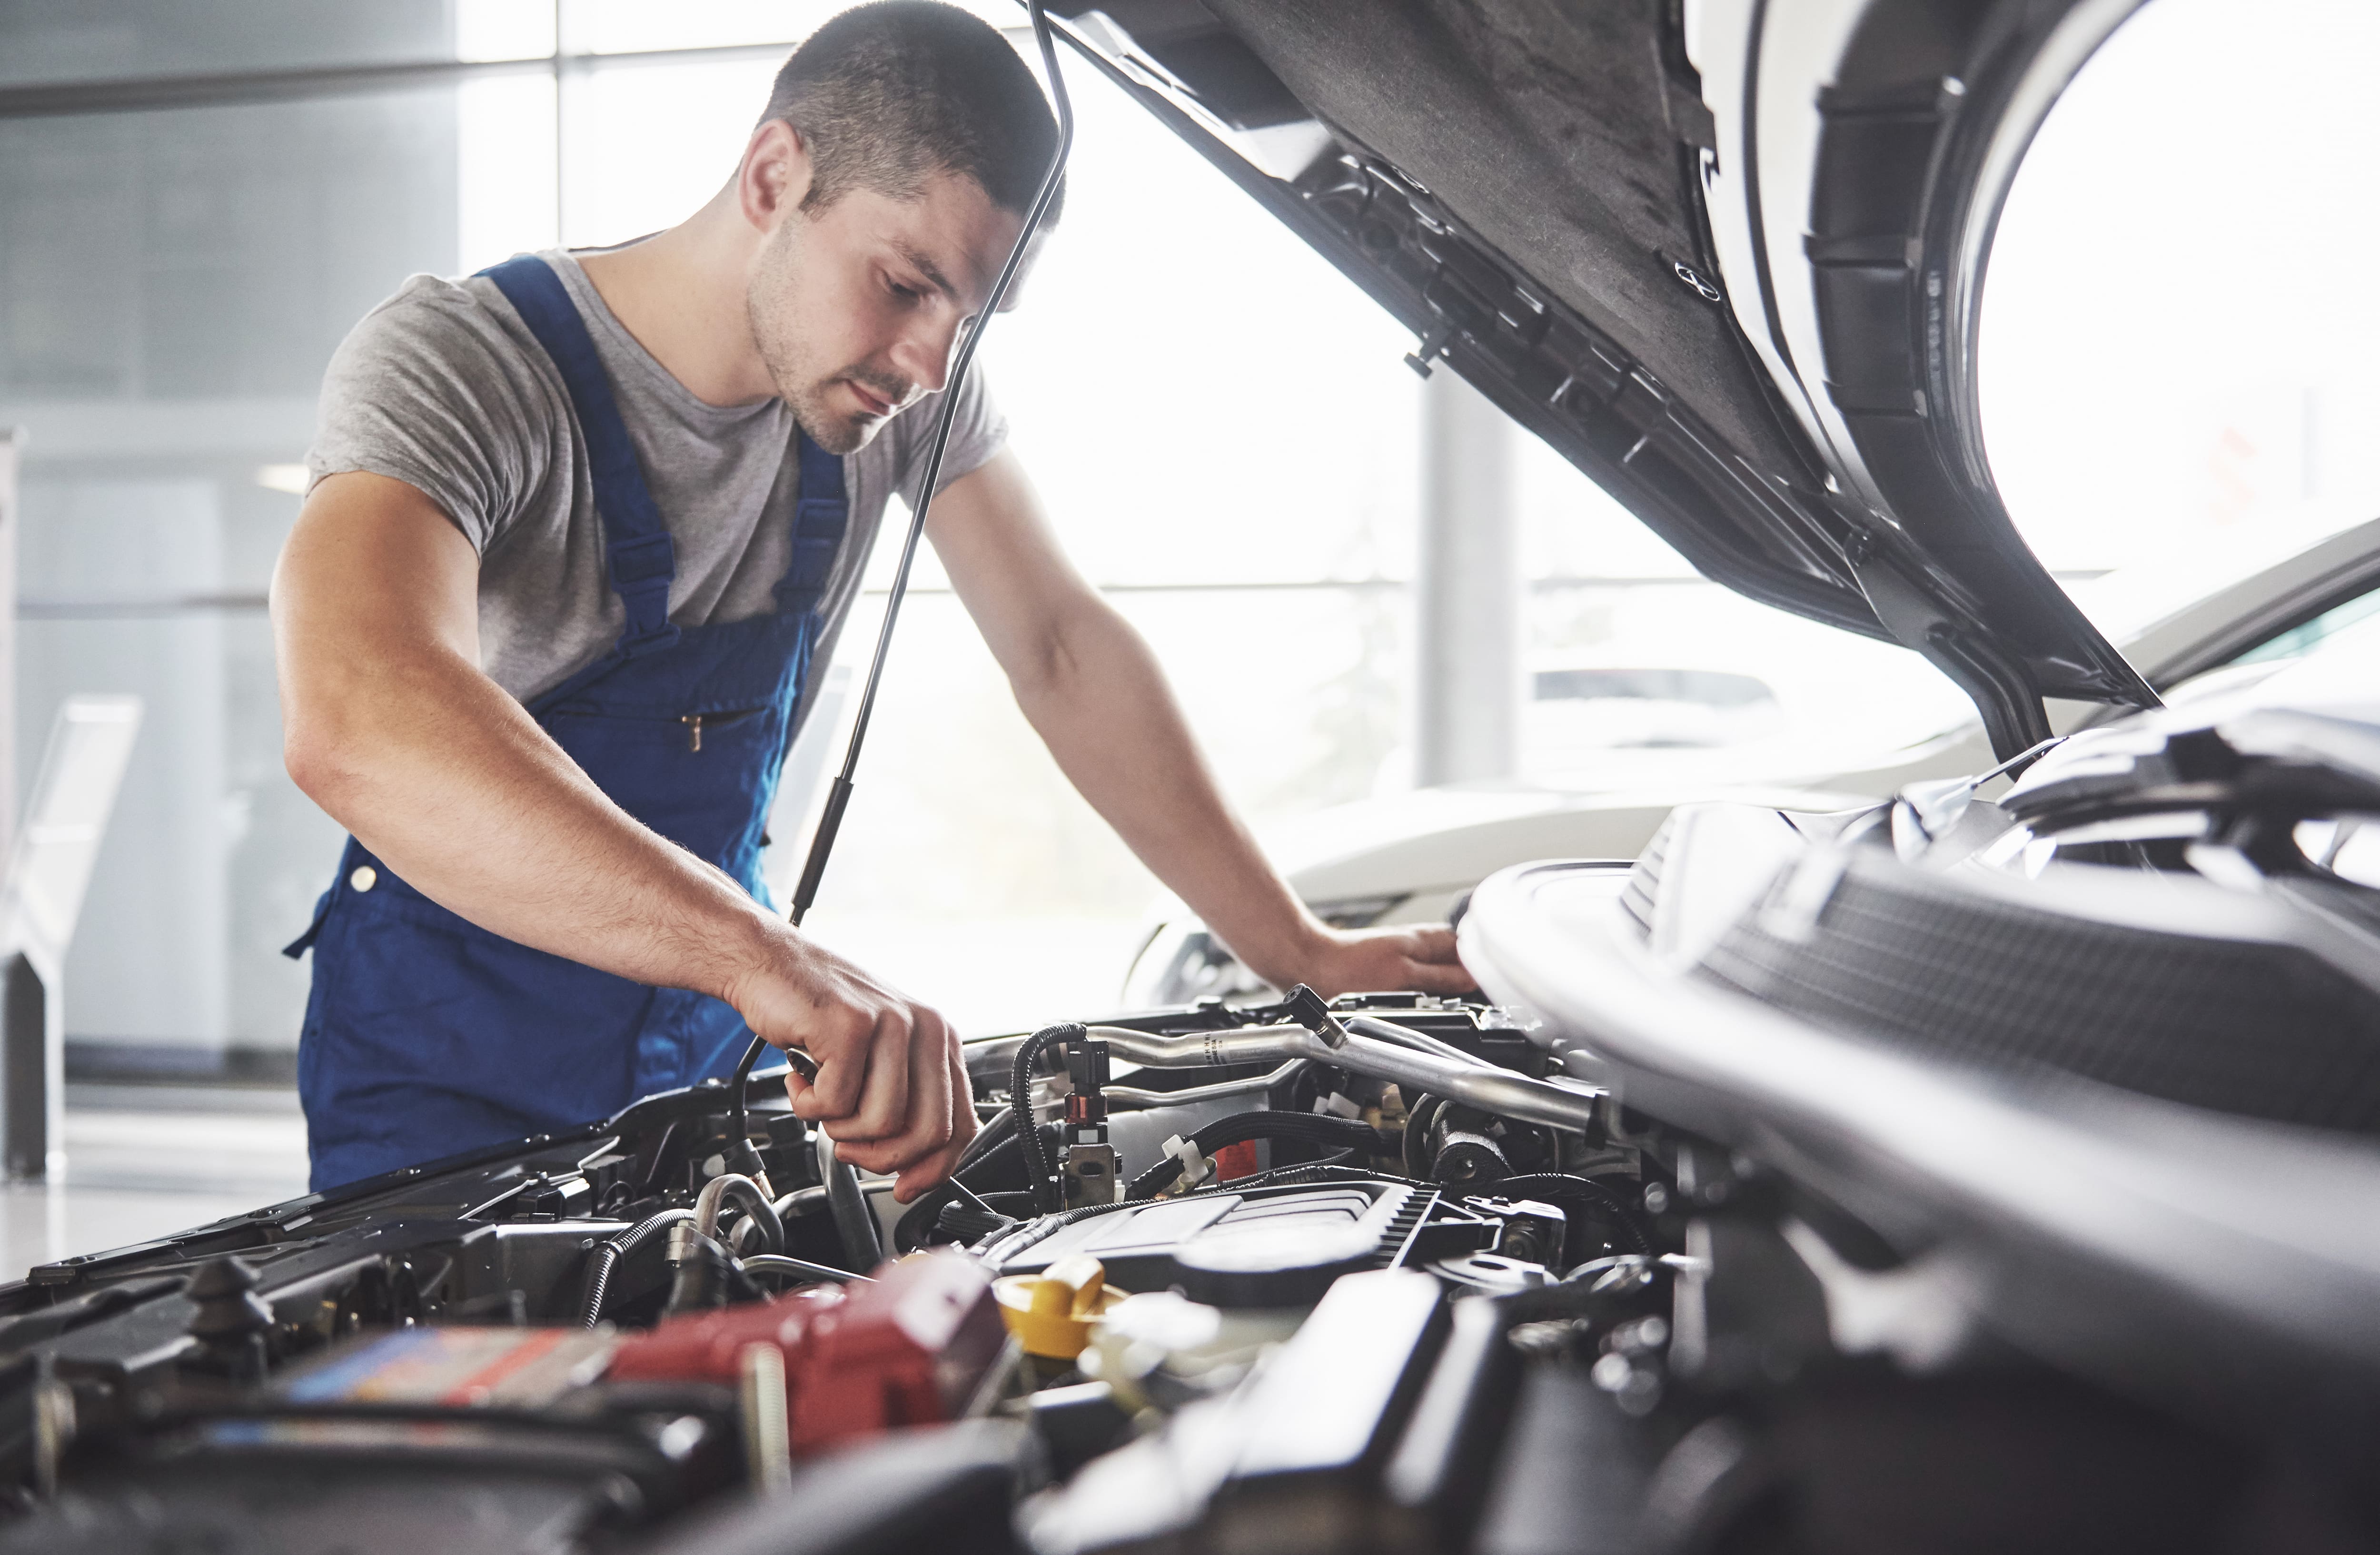 Why is preventive car maintenance and repair important?